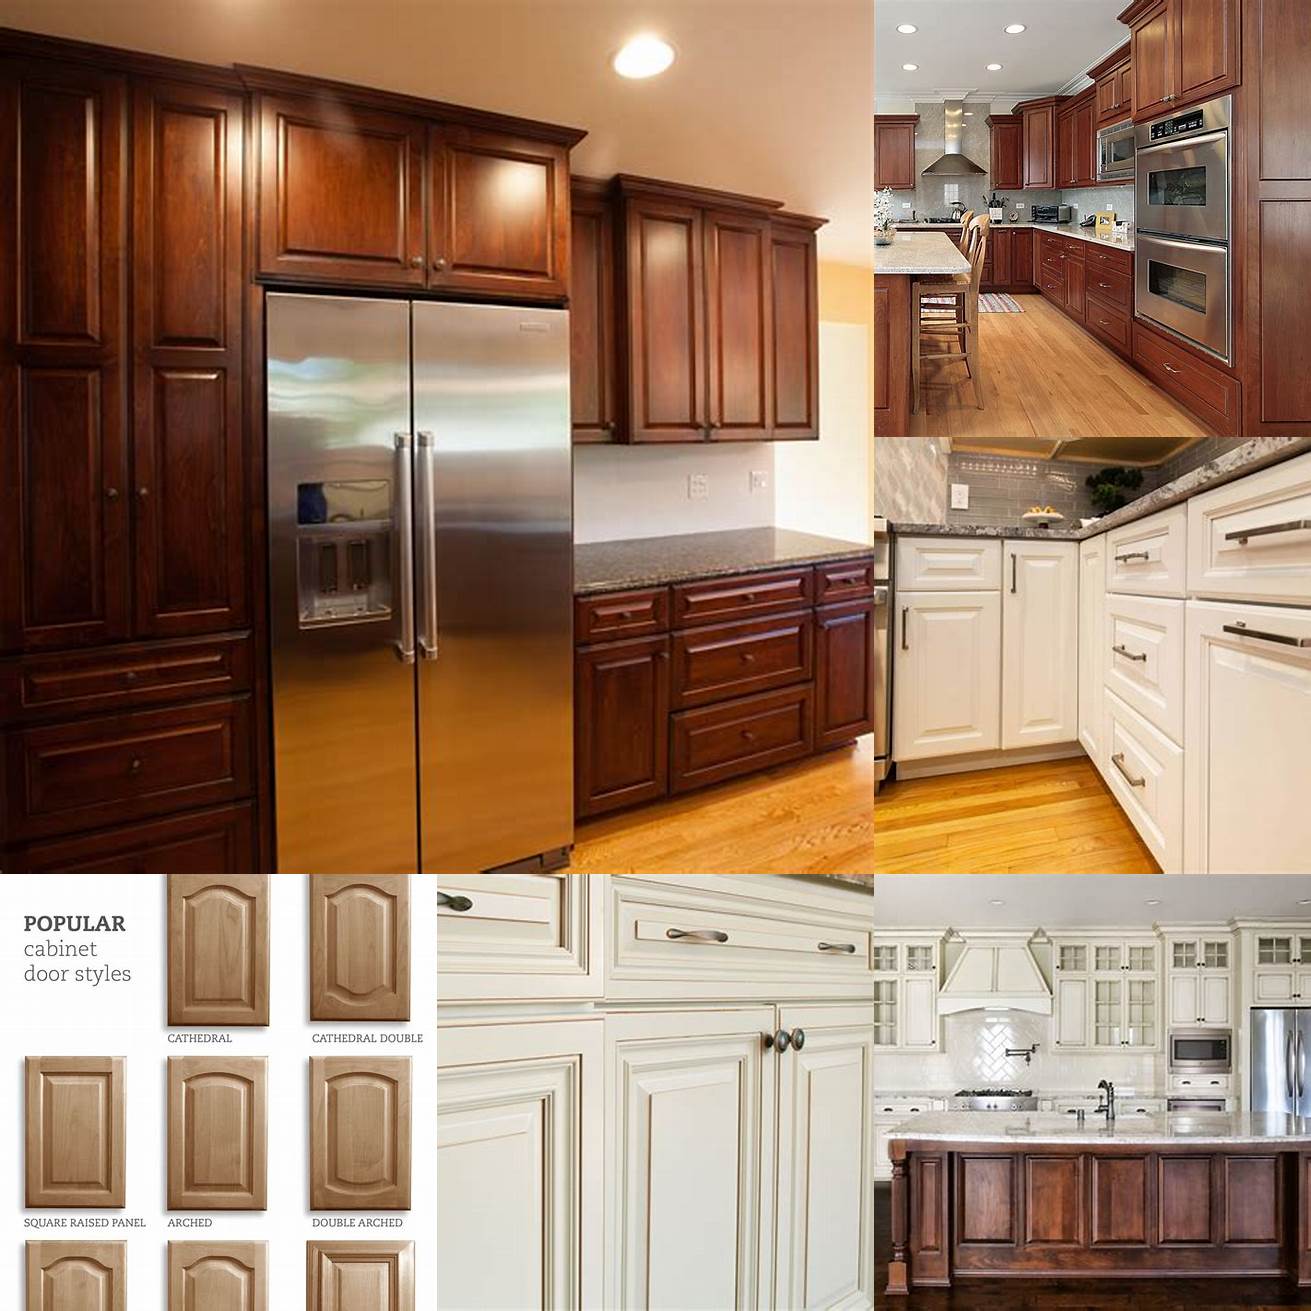 Kitchen doors with a raised panel design